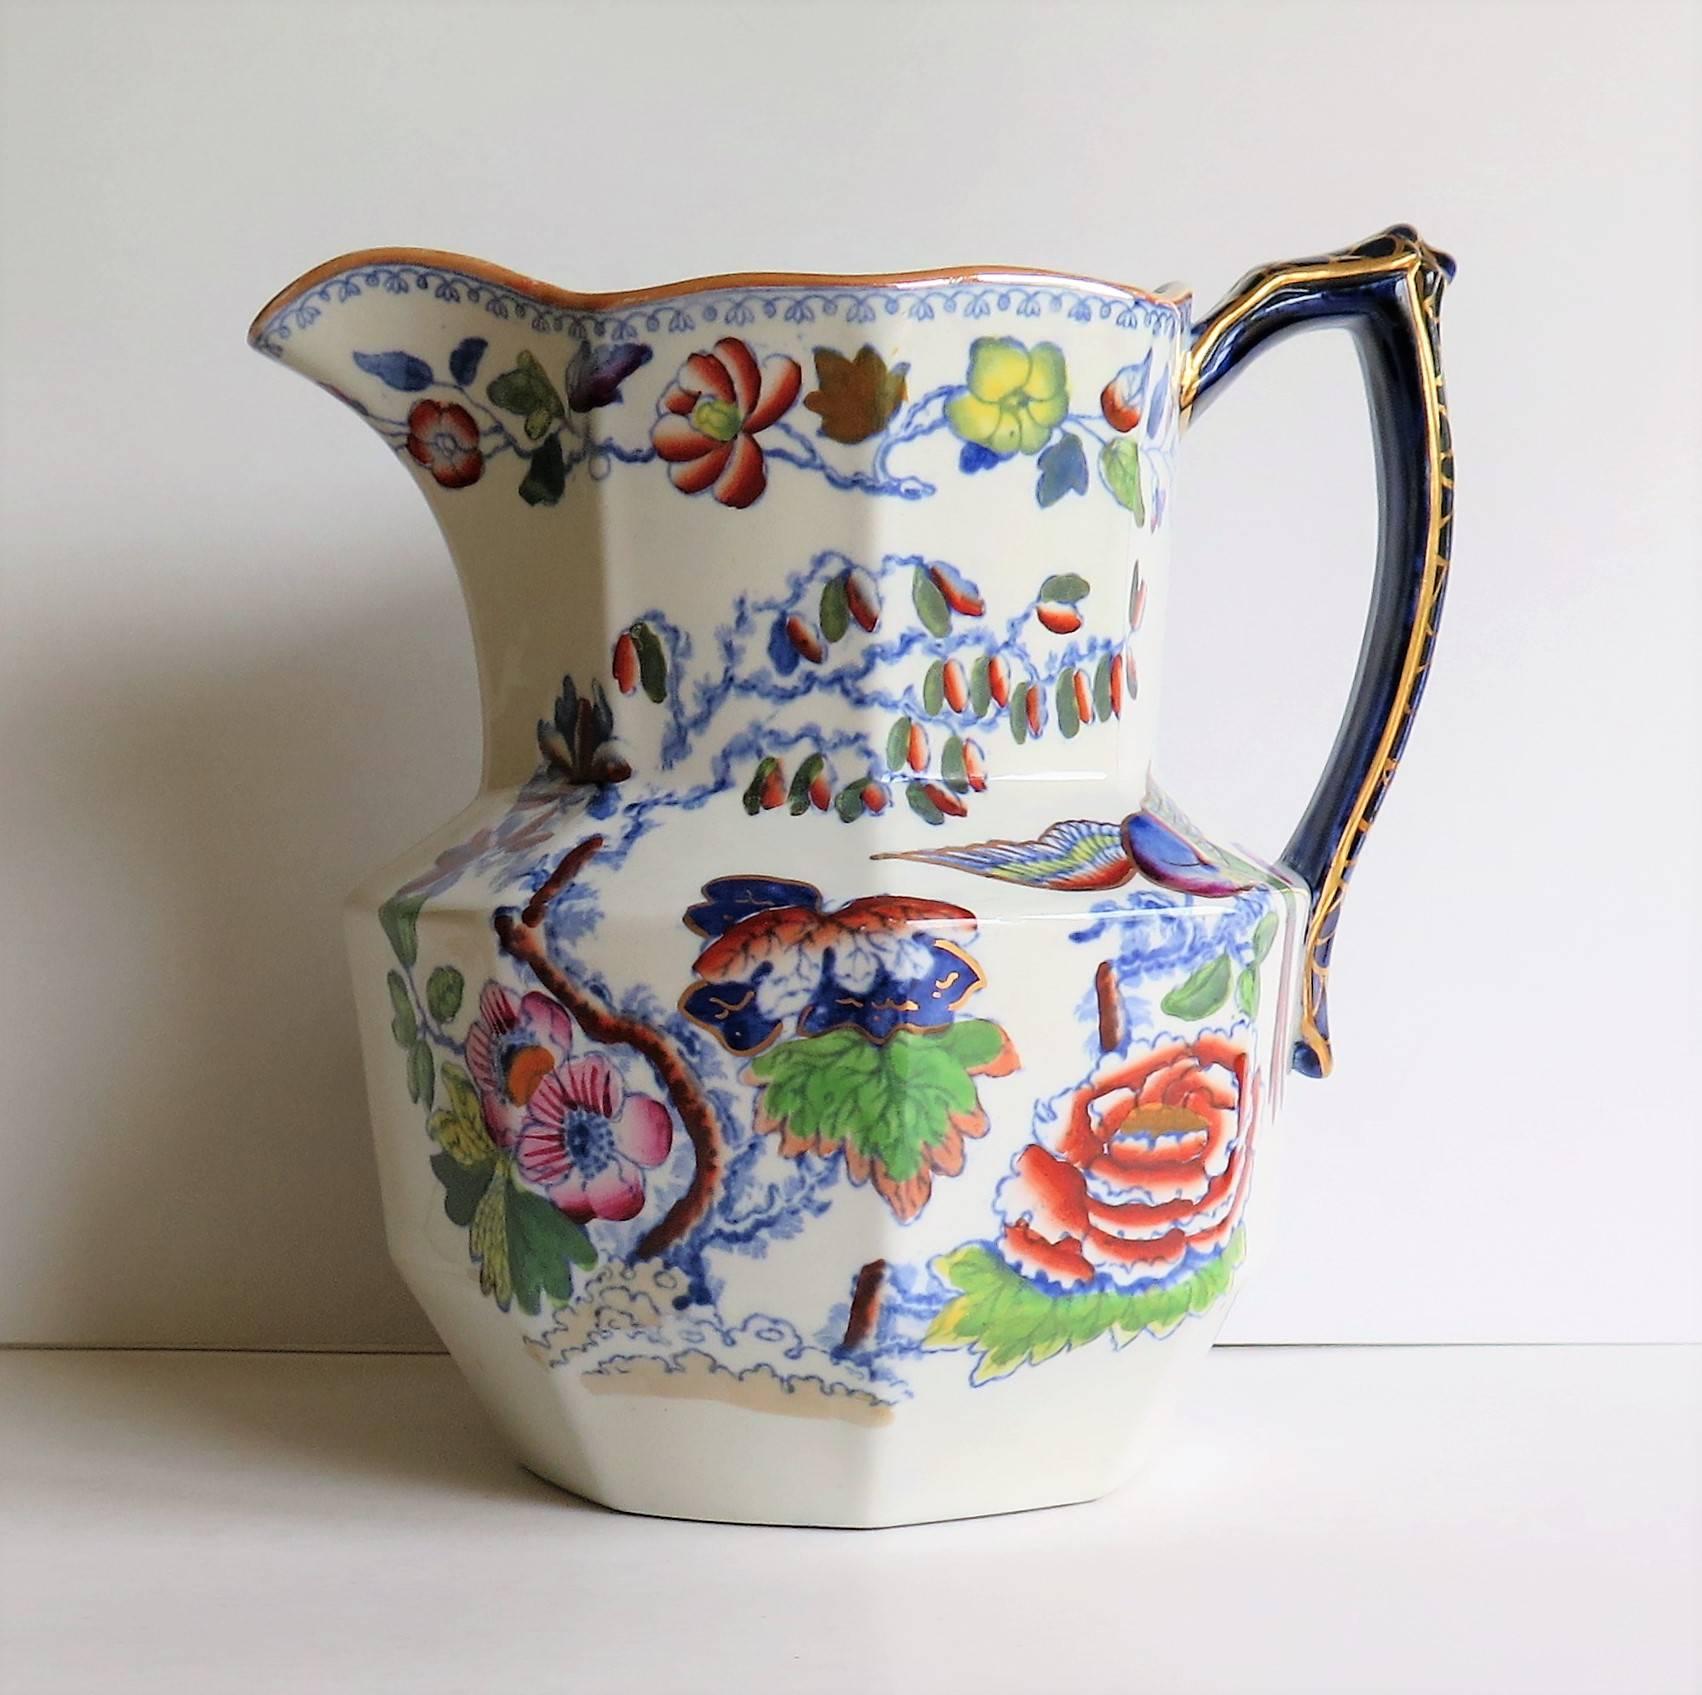 This is a very good large size hydra jug or pitcher by Mason's Ironstone, England, which we date to the late 19th Century Ca 1900. 

The Jug is octagonal in shape with an angular loop handle and impressive size of nominally 9 inches high. Large